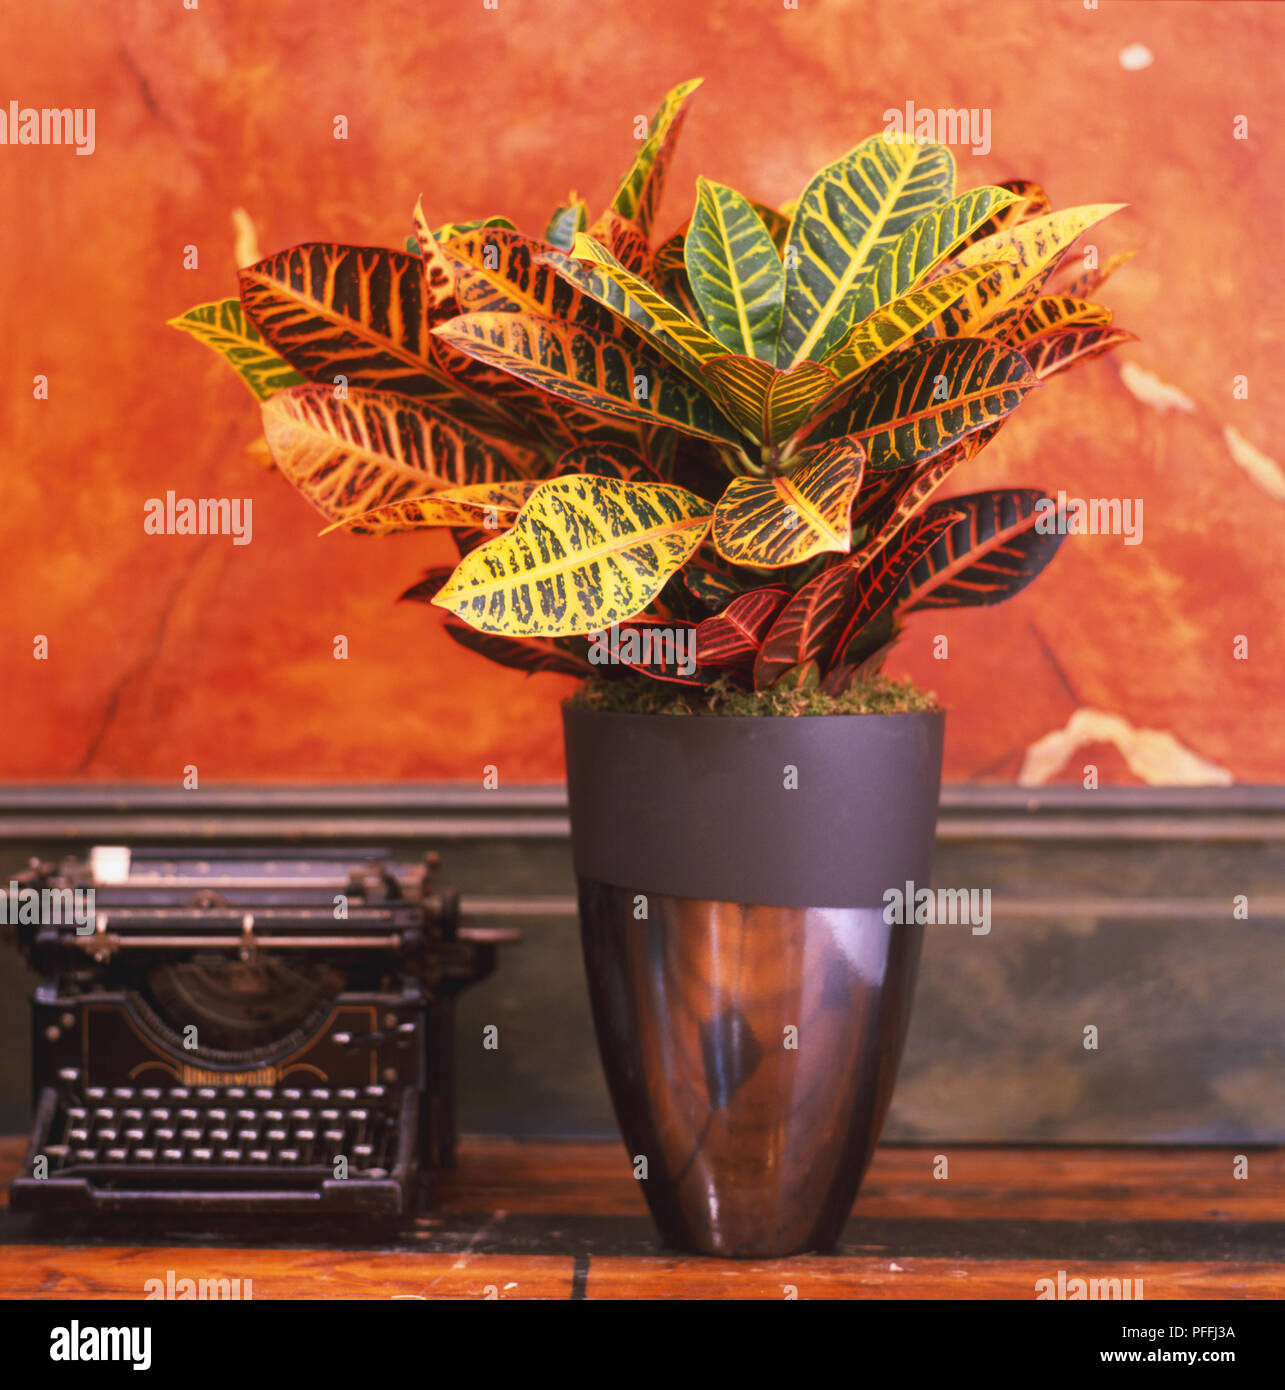 The baked-earth, Codiaeum variegatum, hues provide a moody backdrop for the variegated croton in a modern container, next to an old fashioned typewriter. Stock Photo